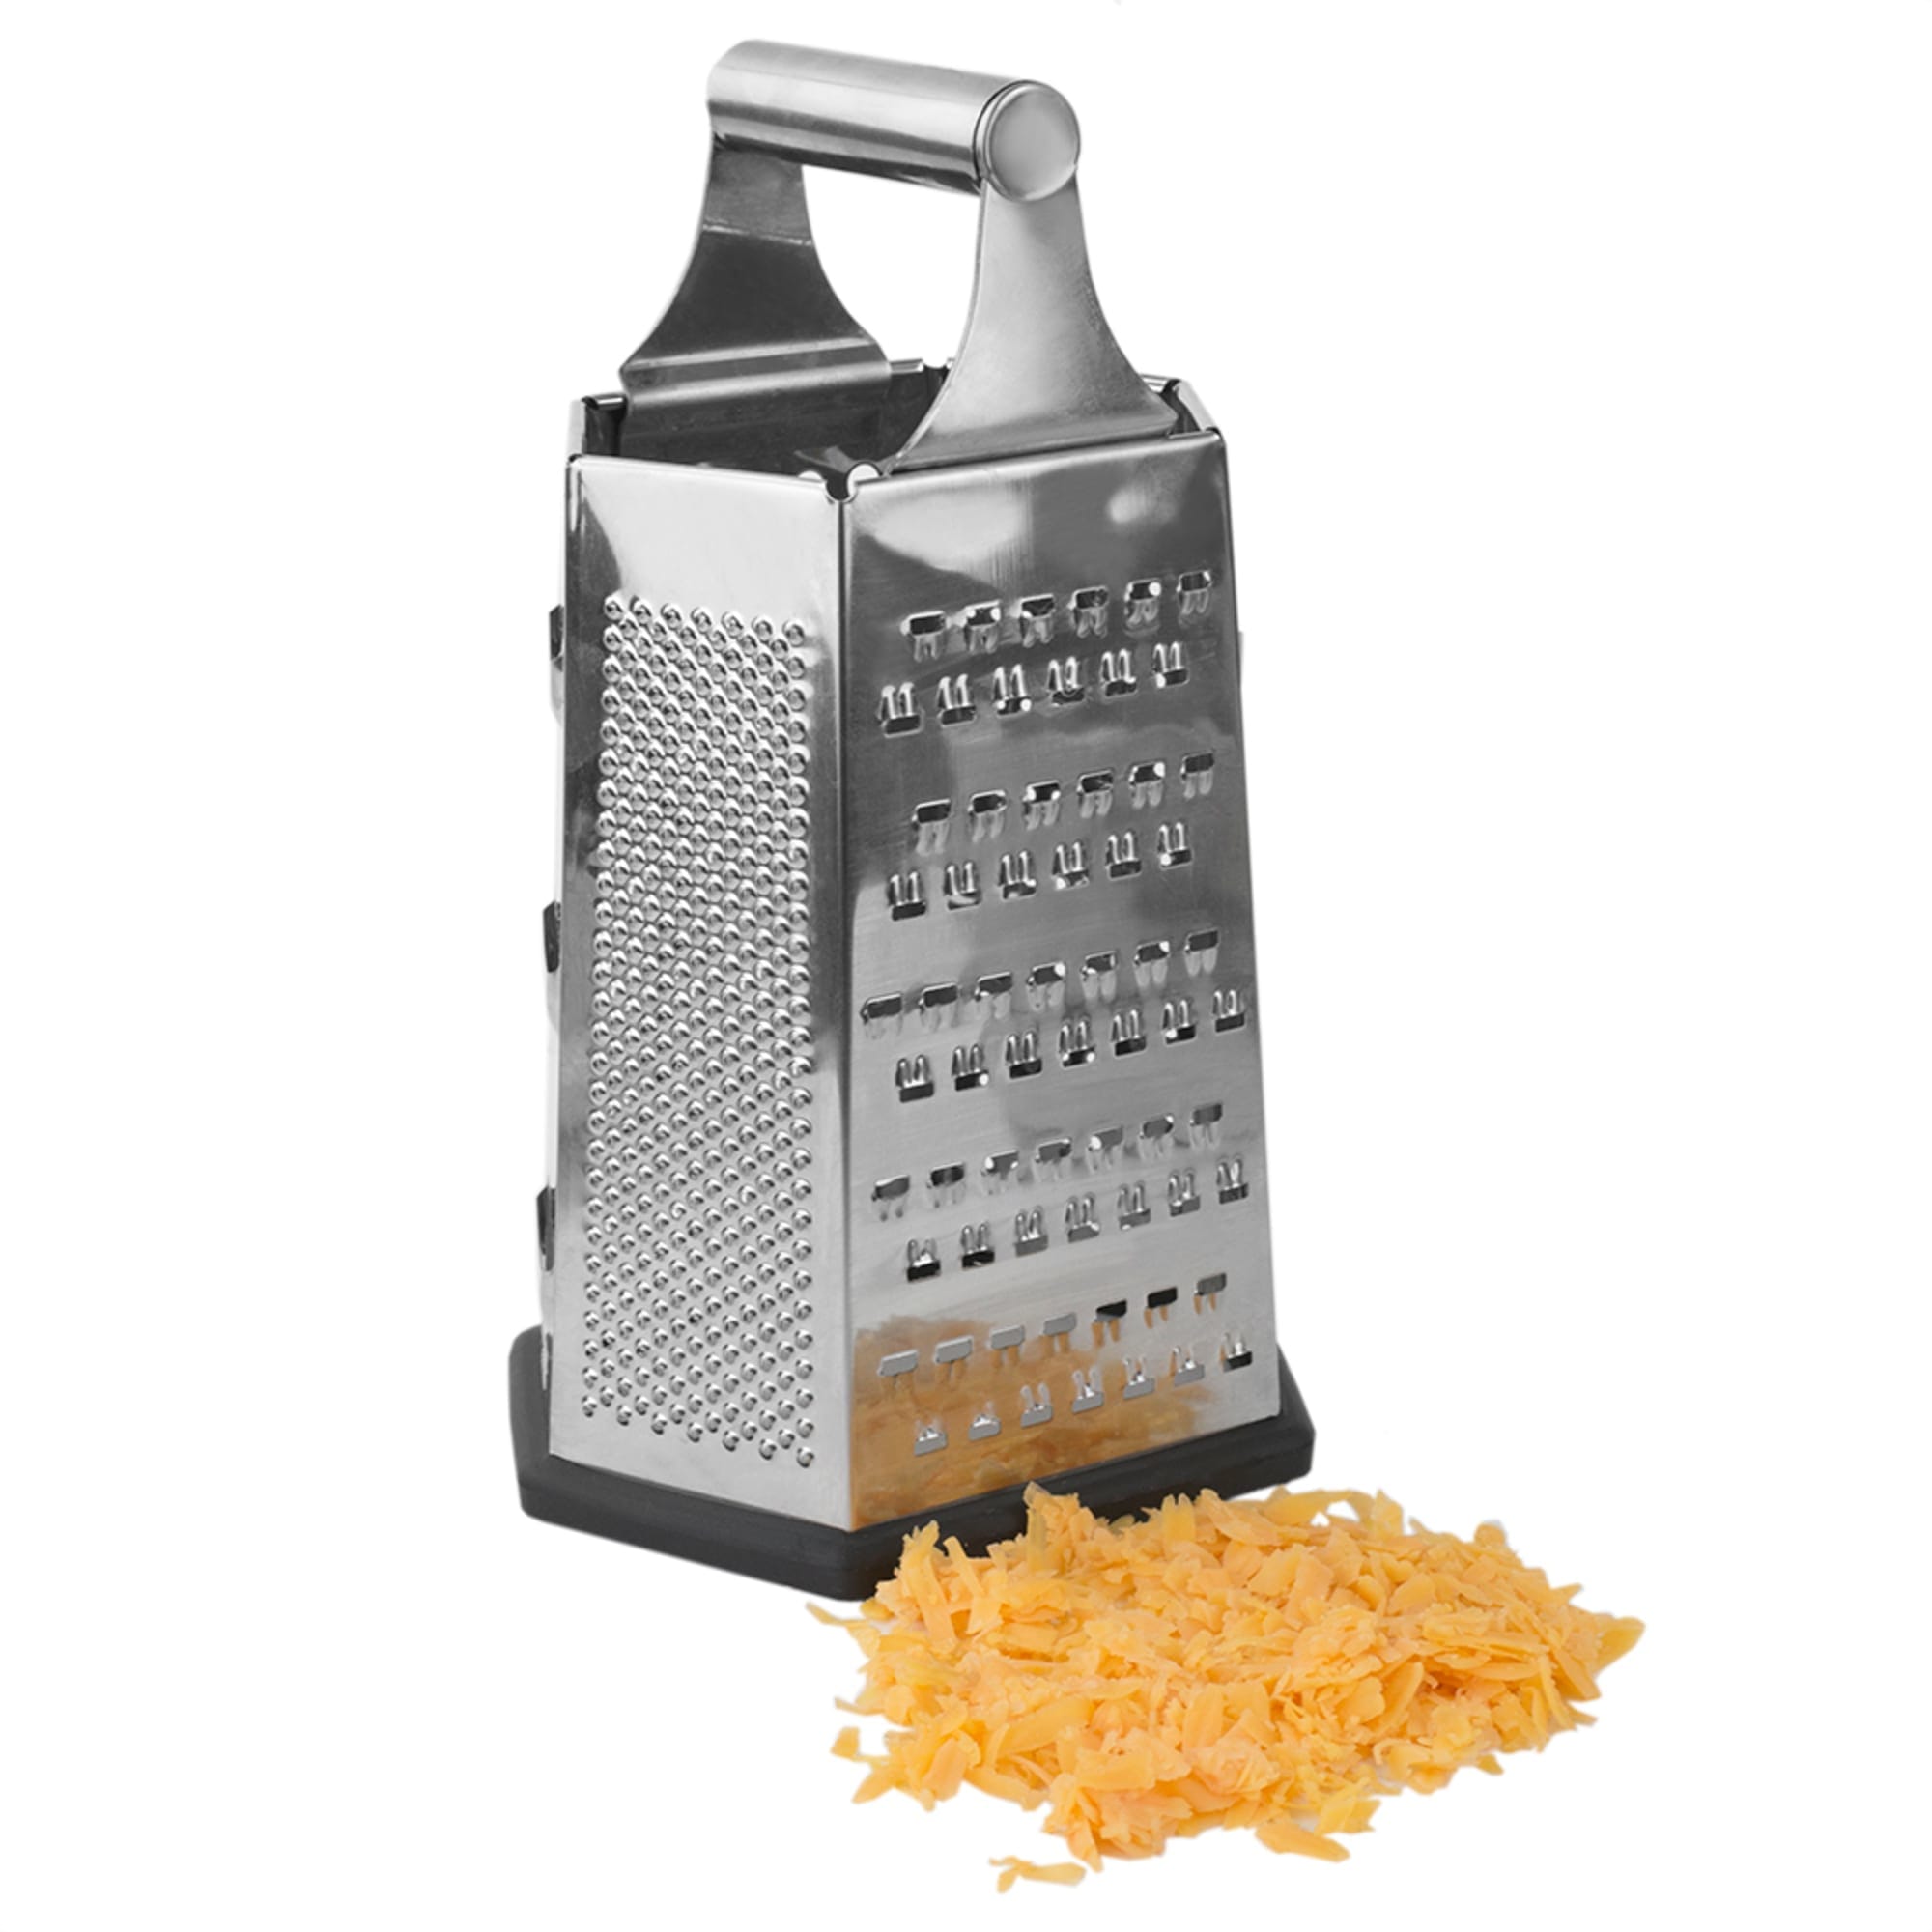 Home Basics Heavy Weight 6 Sided Stainless Steel Cheese Grater with Non-Skid Rubber Base, Black $4.00 EACH, CASE PACK OF 24